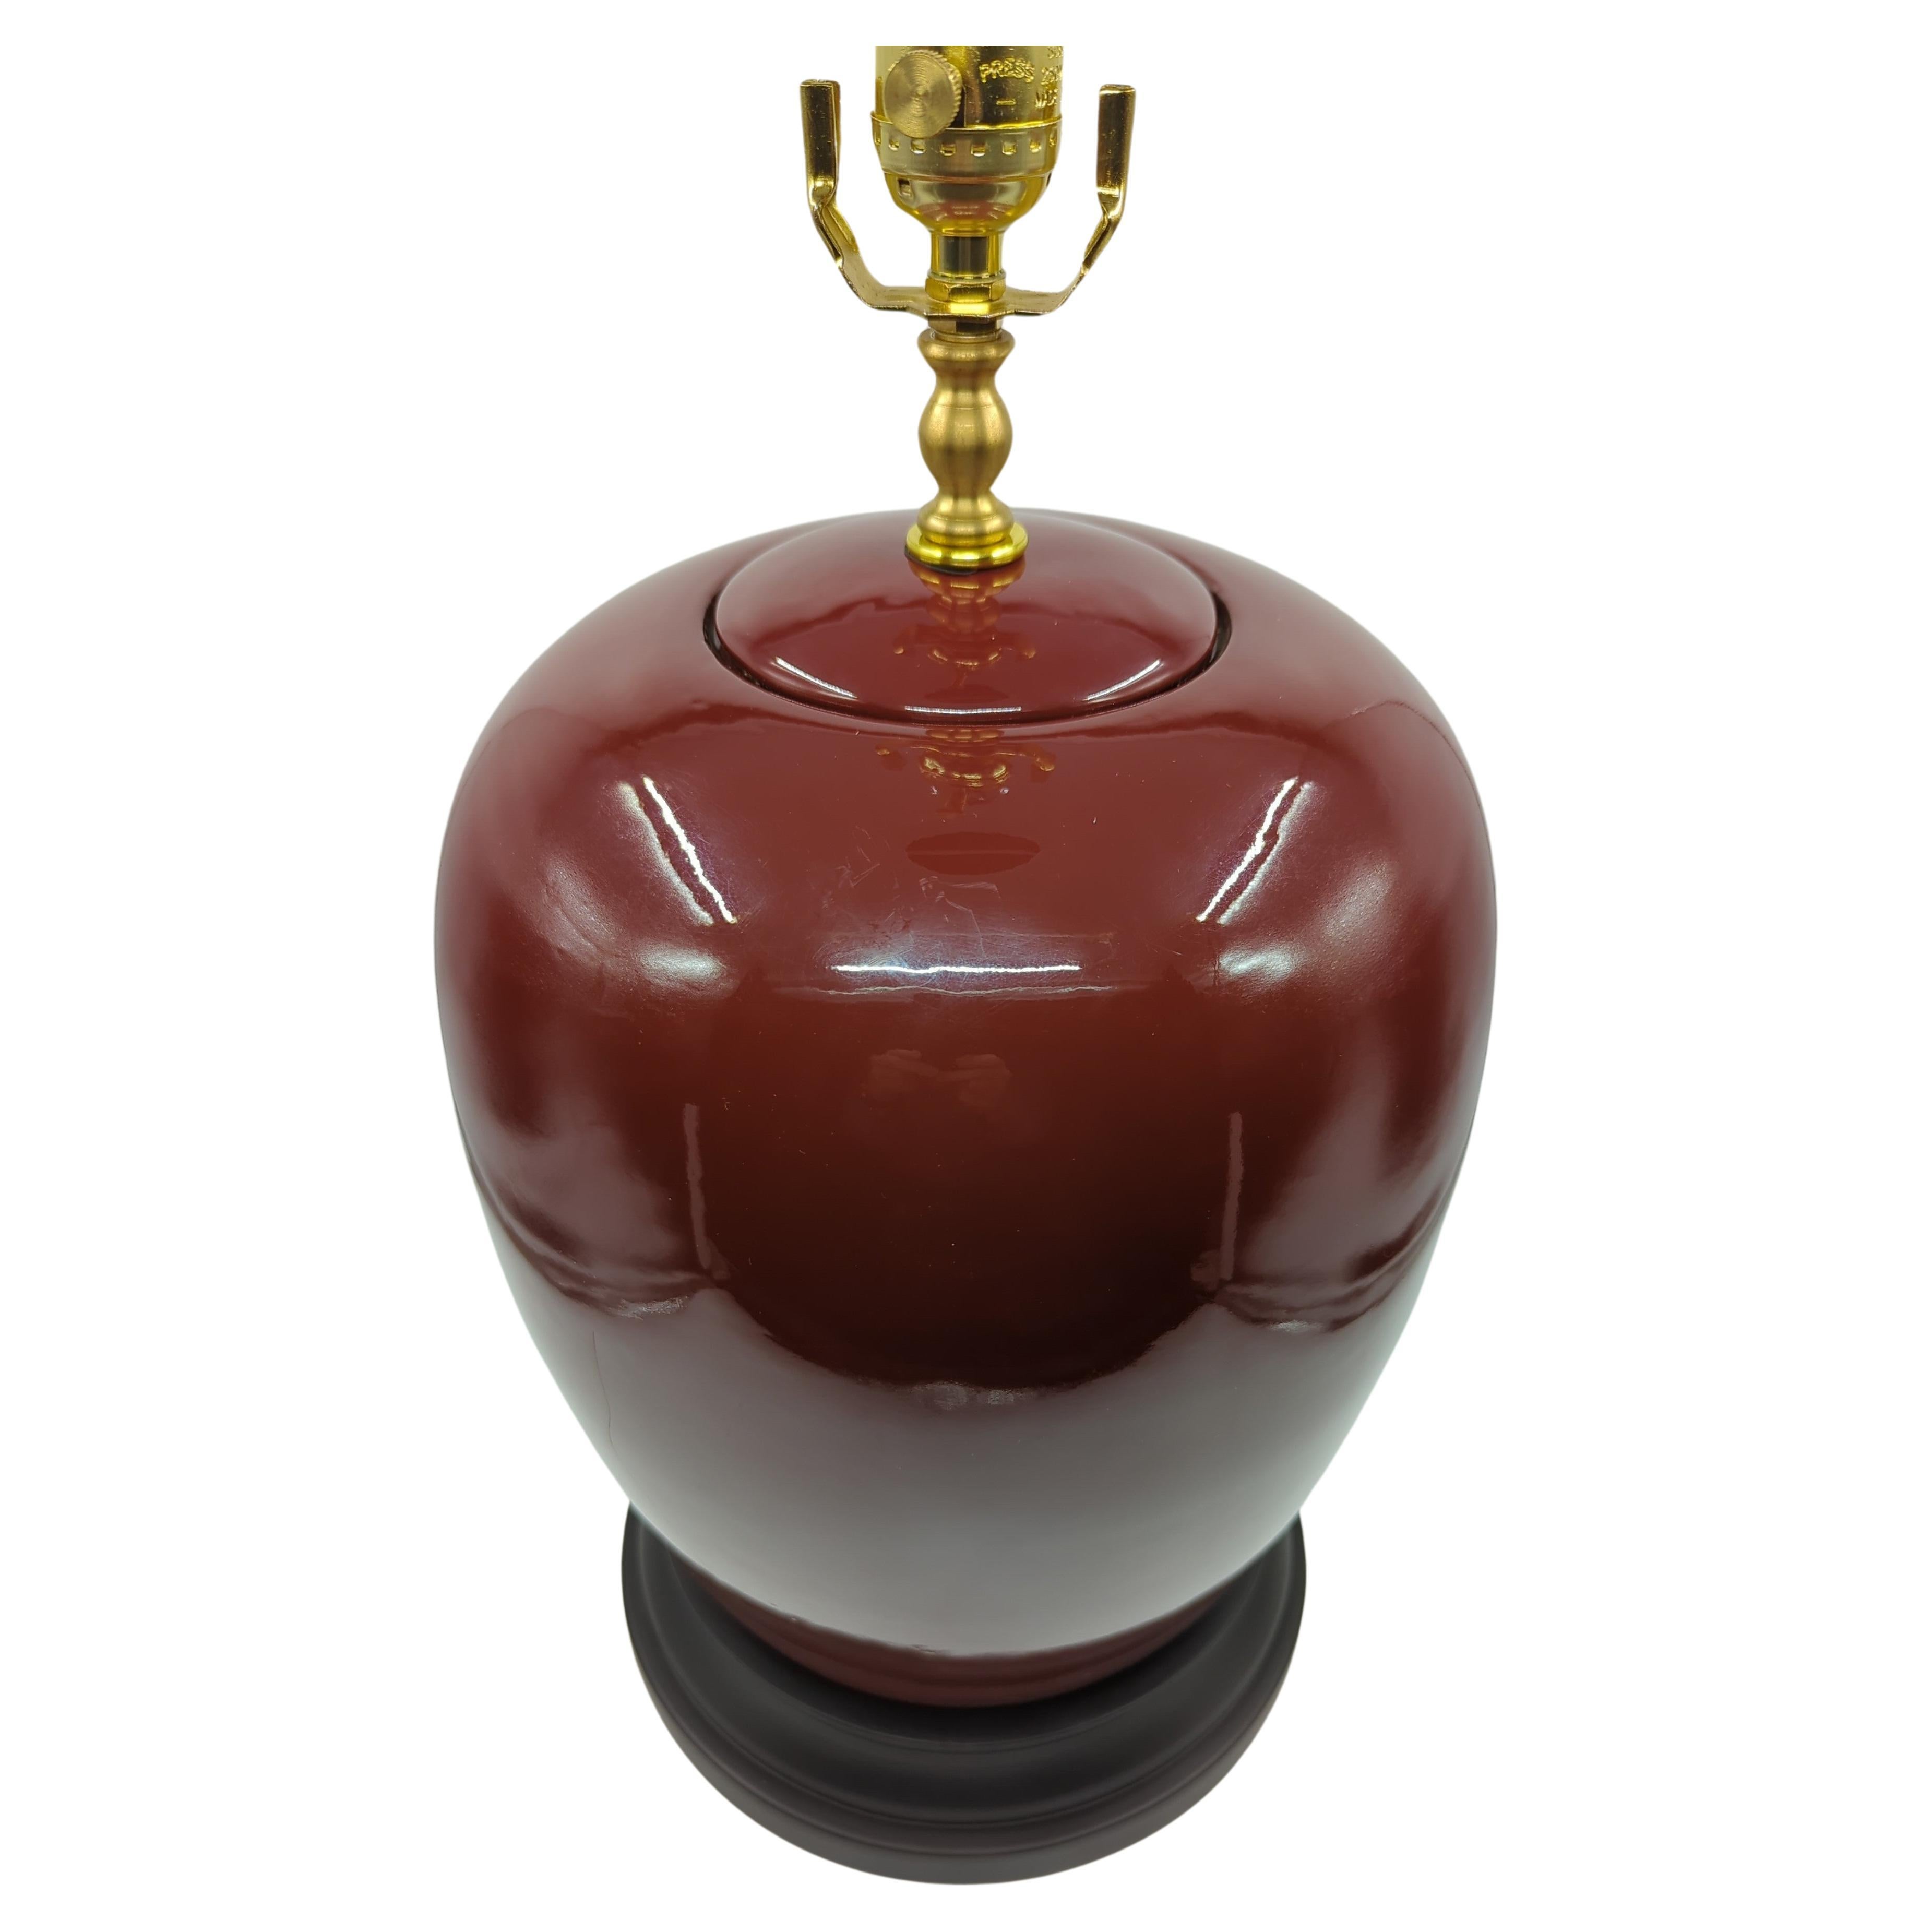 Chinese Export Large Vintage Chinese Ox-Blood Flambe Glaze Covered Vase Lamp D: 10